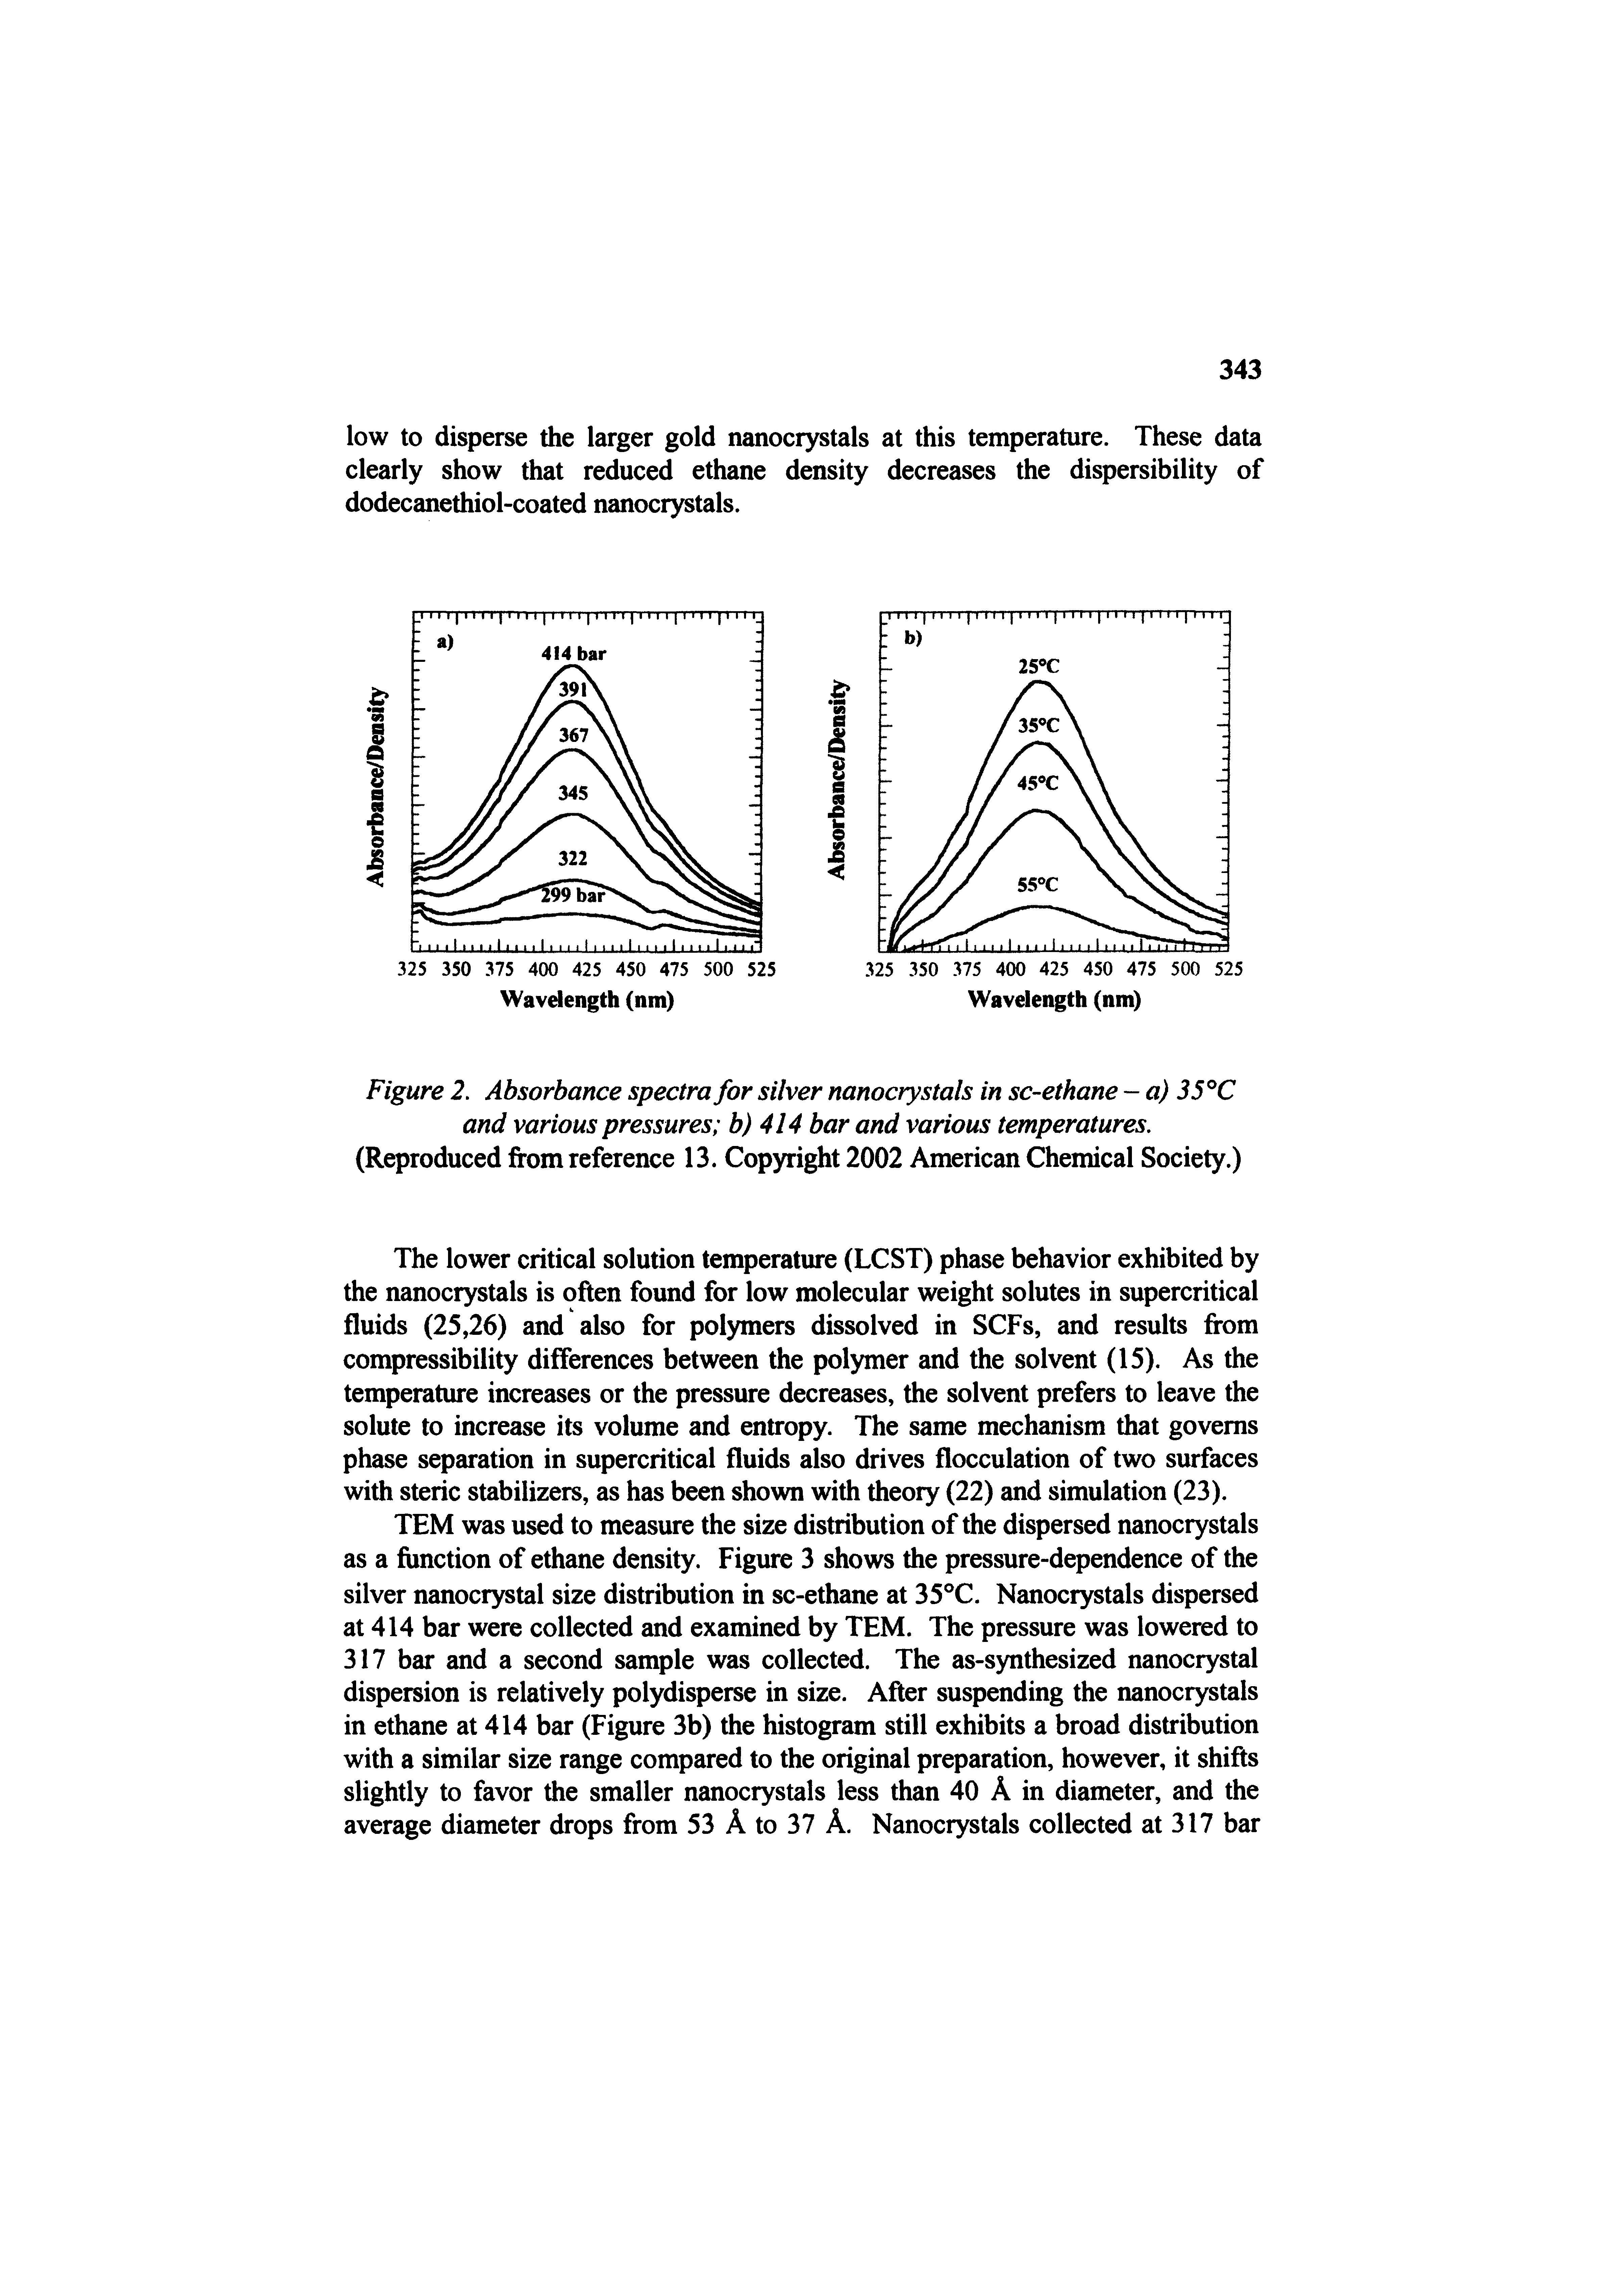 Figure 2. Absorbance spectra for silver nanocrystals in sc-ethane - a) 35 C and various pressures b) 414 bar and various temperatures, (Reproduced from reference 13. Copyright 2002 American Chemical Society.)...